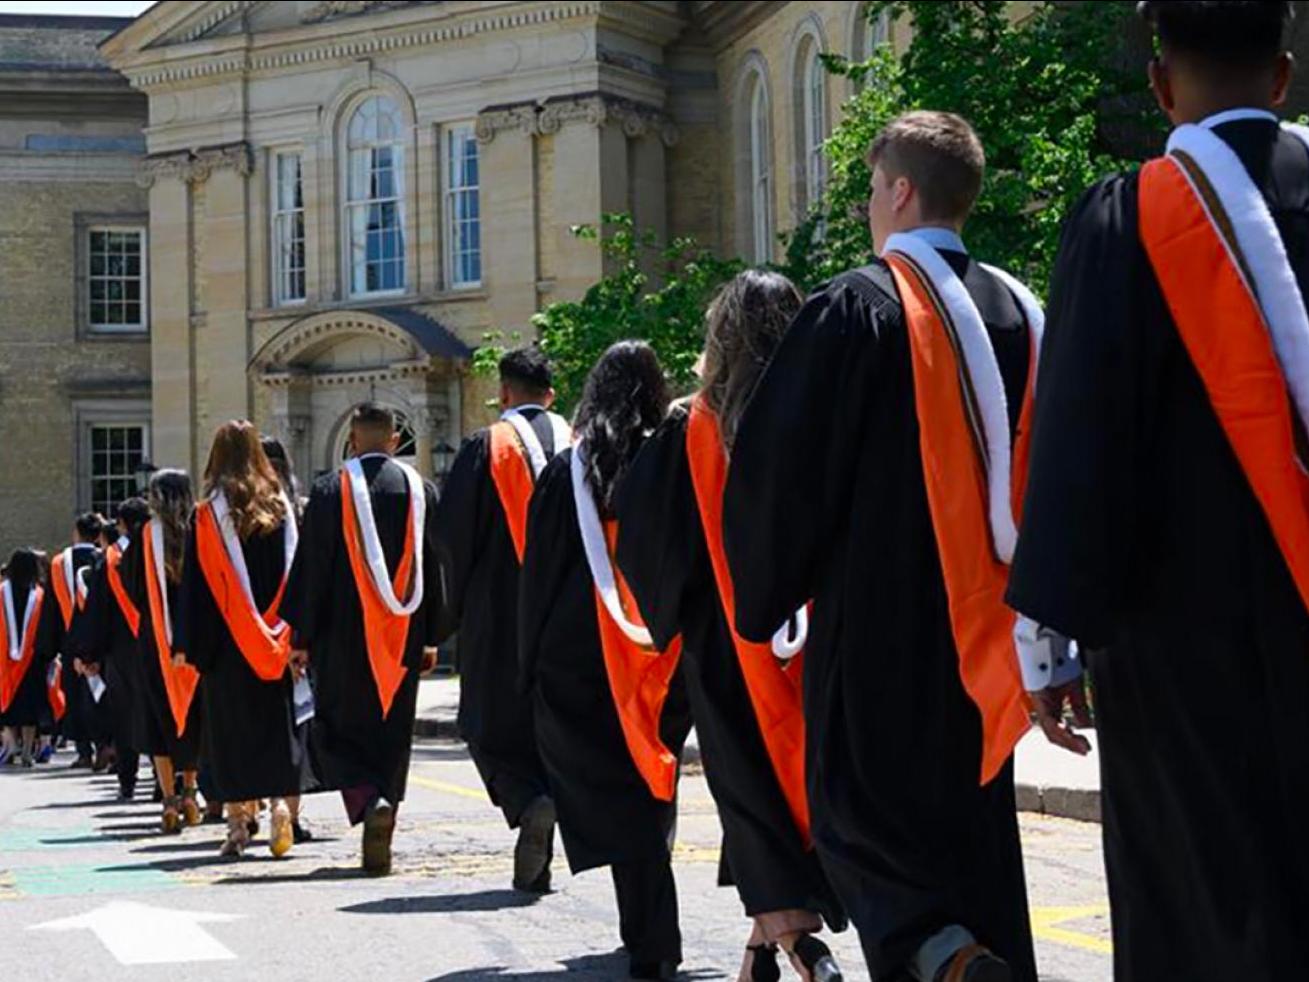 Management graduates line up as they prepare to walk inside Convocation Hall